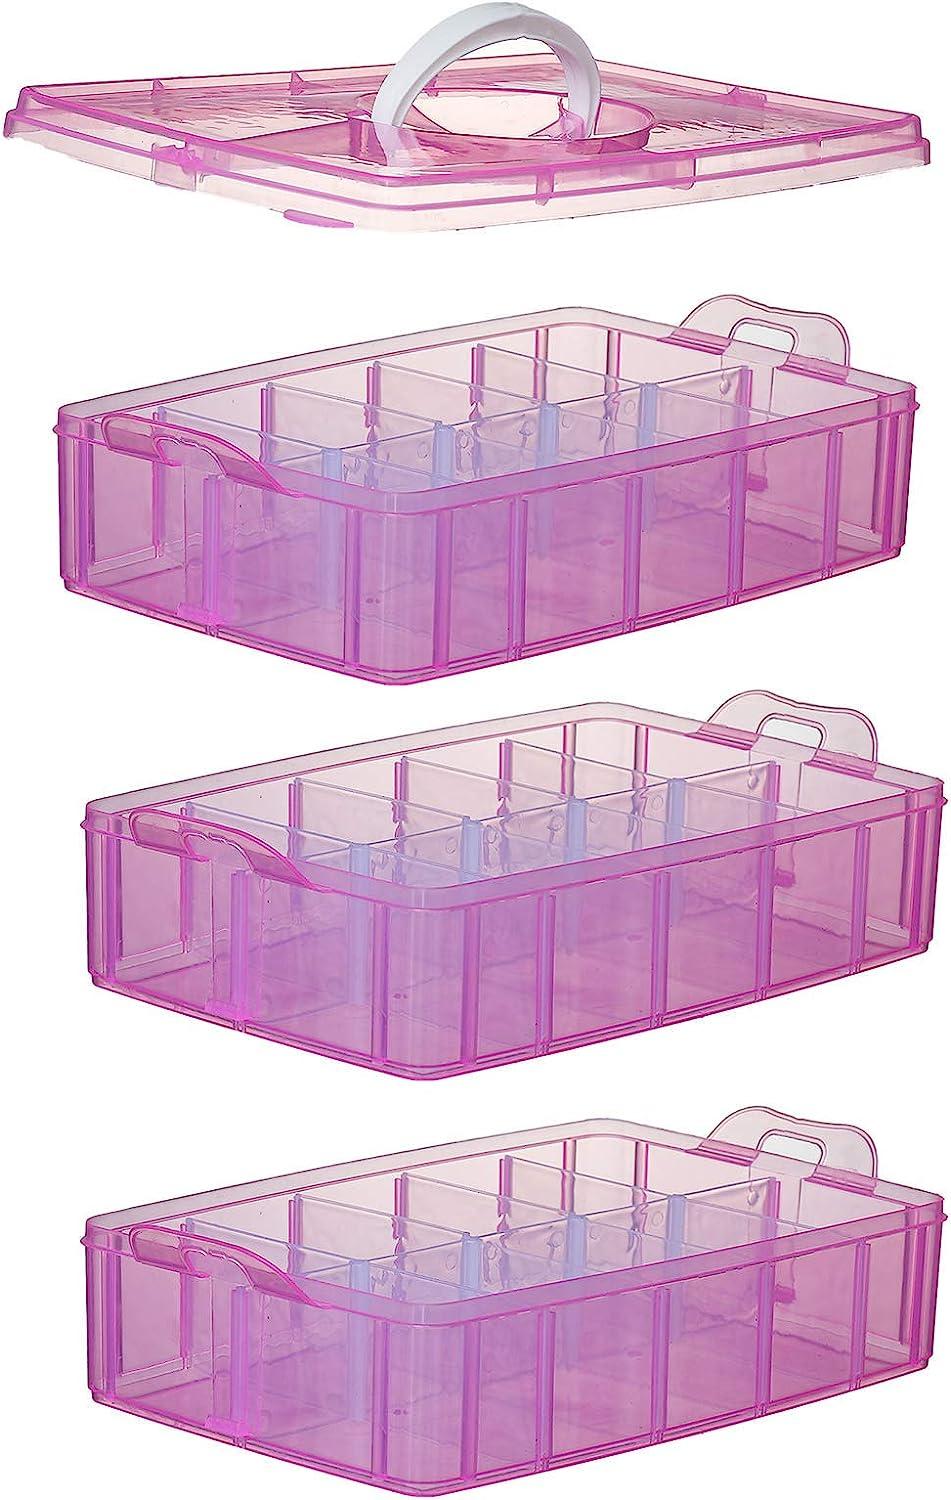 Bins & Things Stackable Storage Container - 30 Adjustable